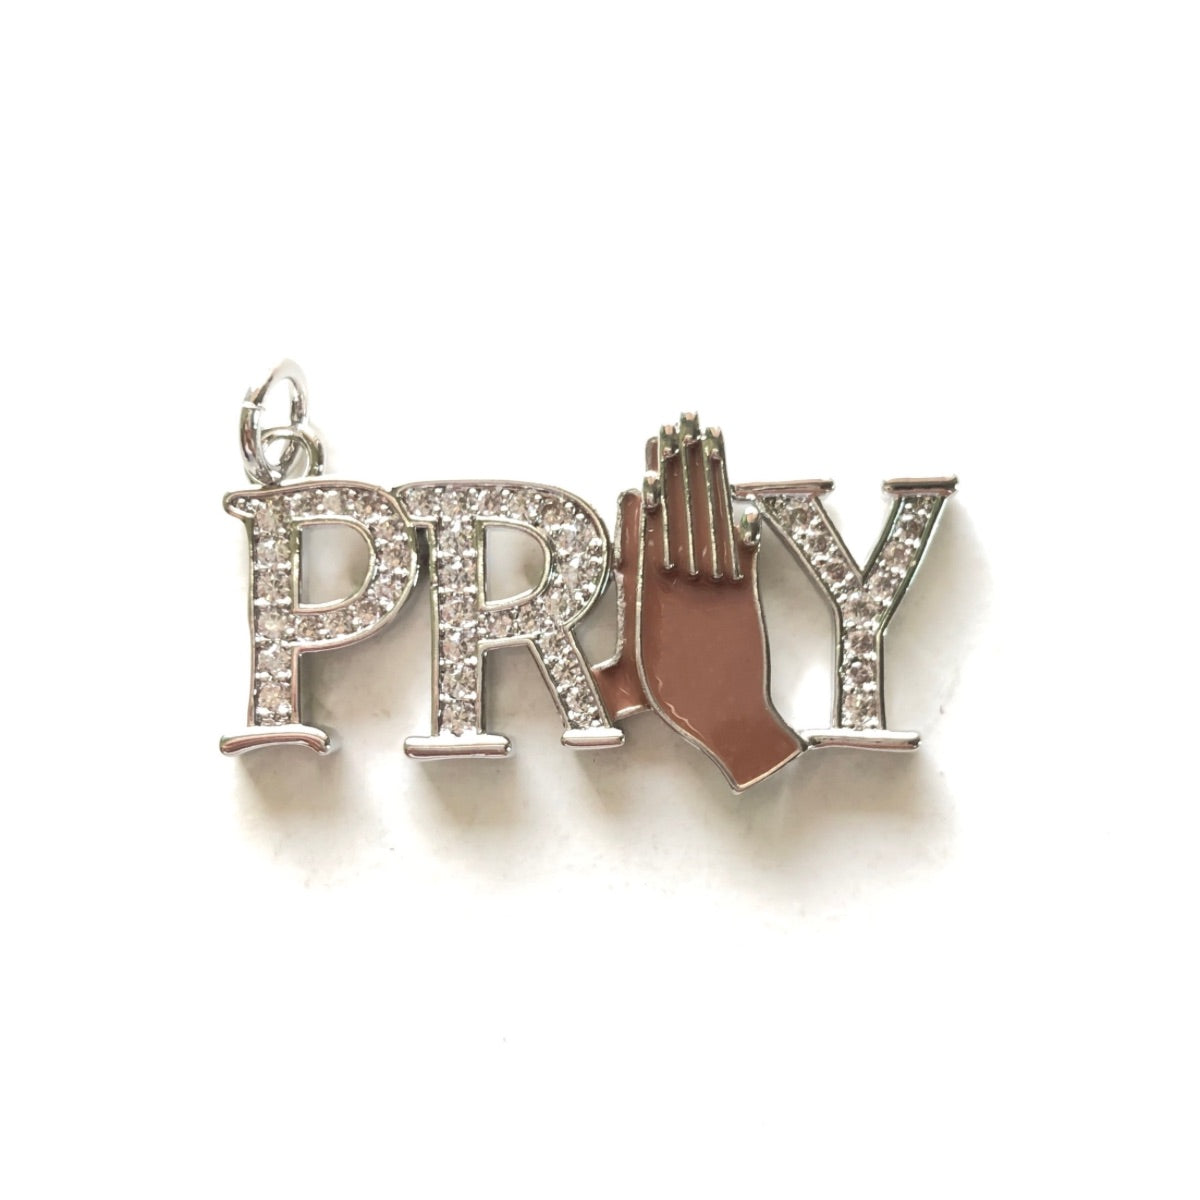 10pcs/lot 35*18mm CZ Pave Praying Hands Pray Word Charms CZ Paved Charms Christian Quotes New Charms Arrivals Words & Quotes Charms Beads Beyond